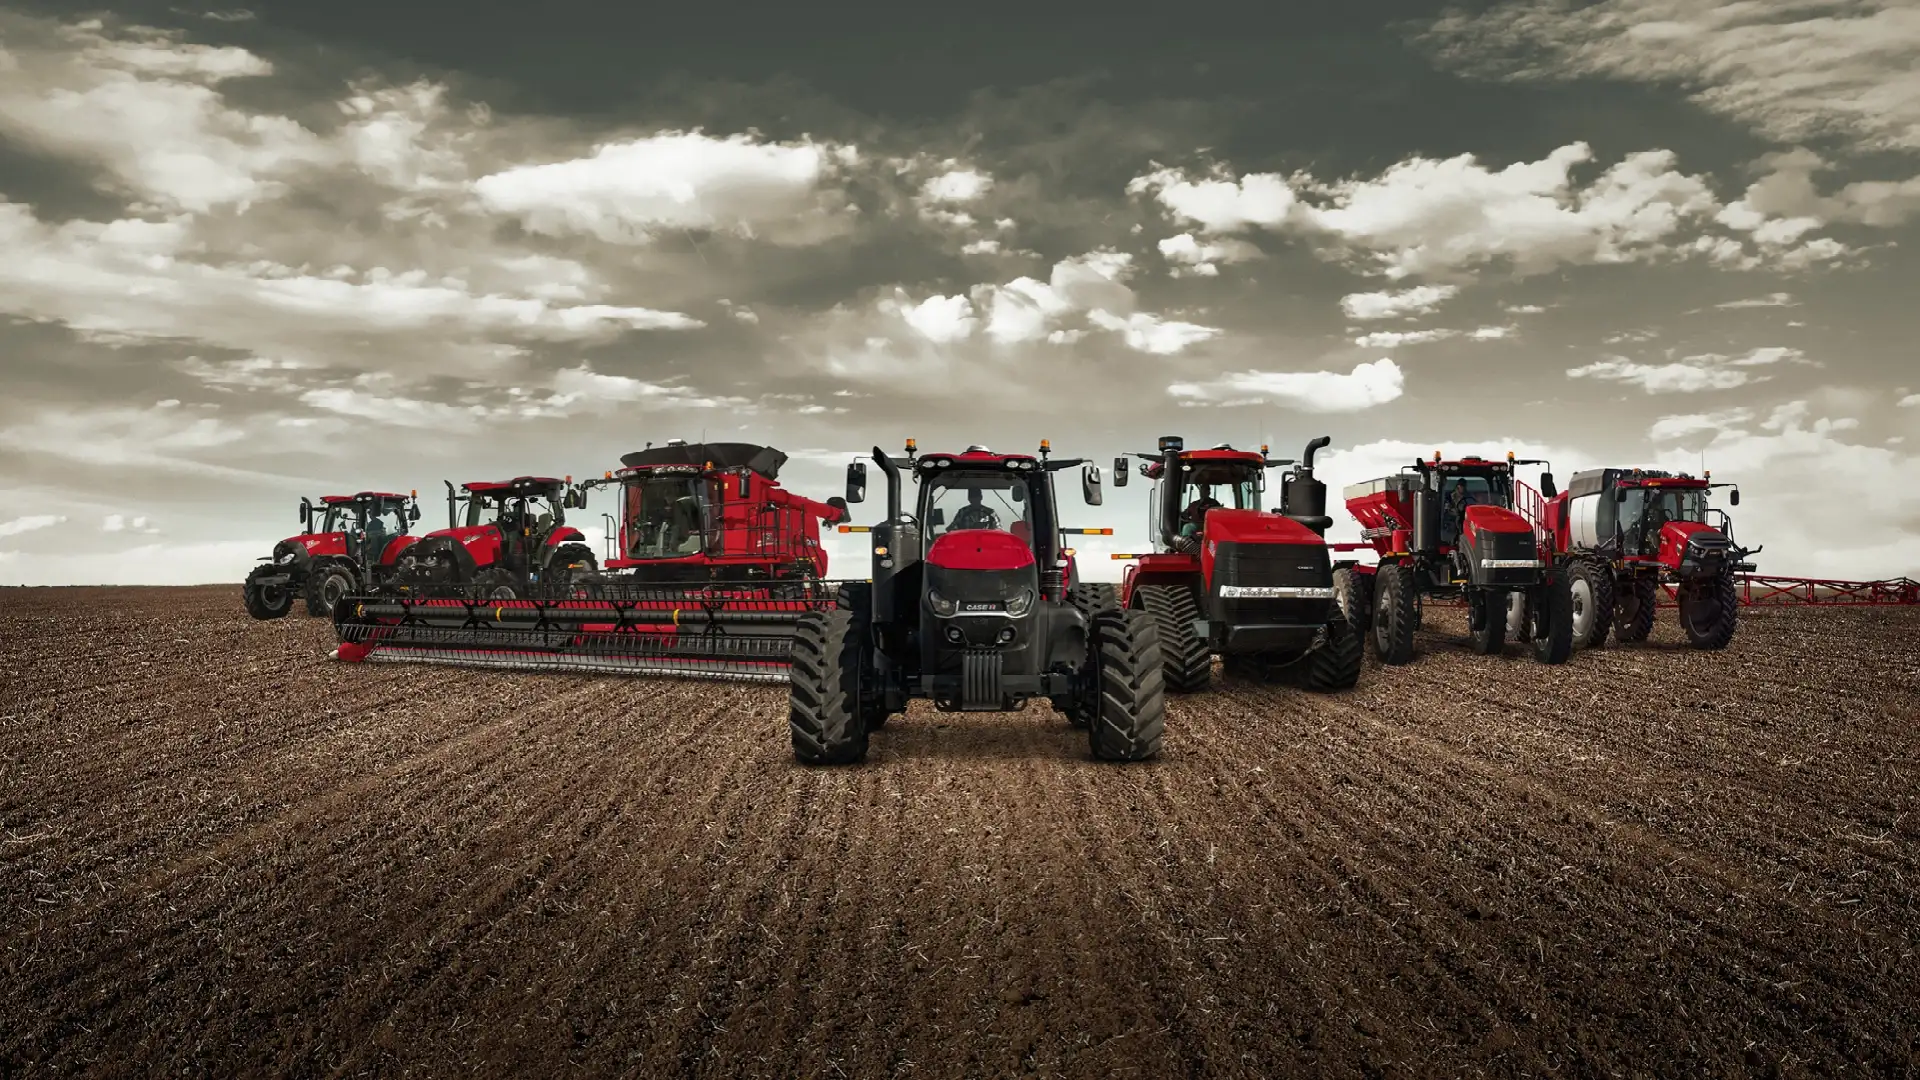 Case IH is developing driverless tractors